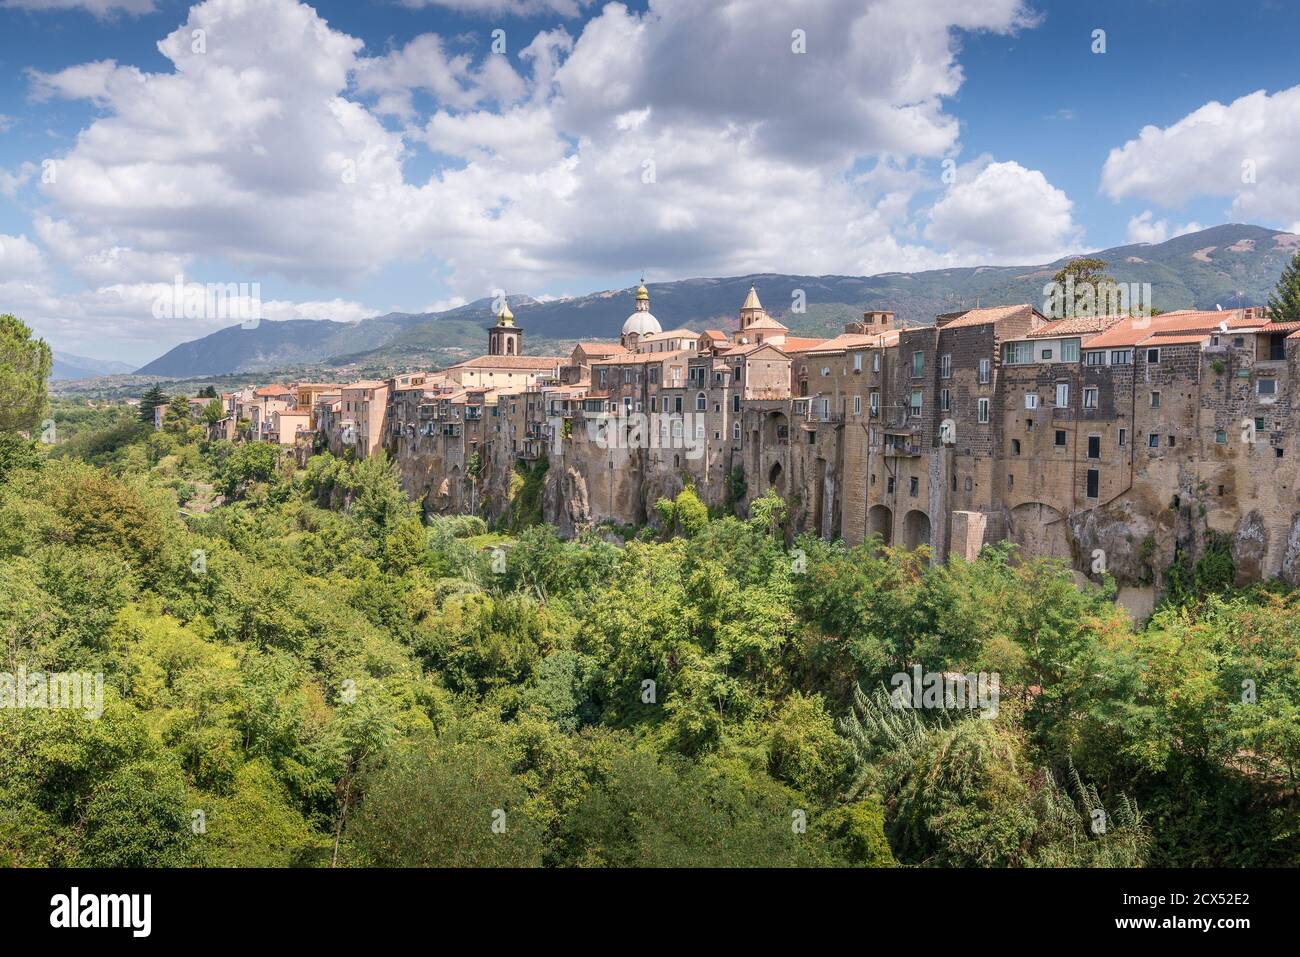 View of Sant'Agata de Goti in Italy with clouds trees and buildings Stock Photo